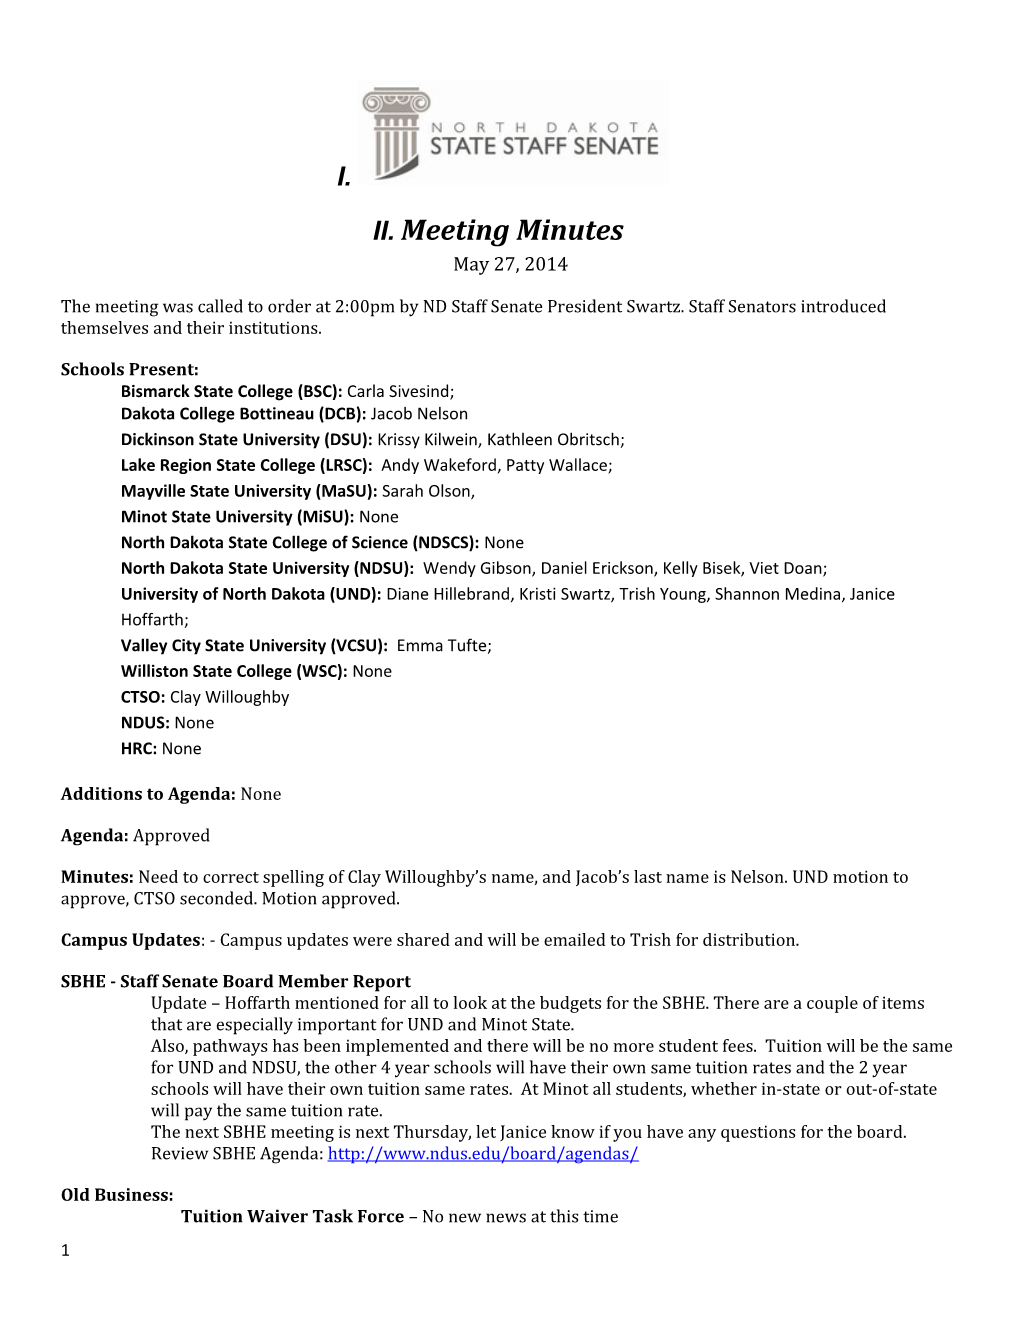 Meeting Minutes s13